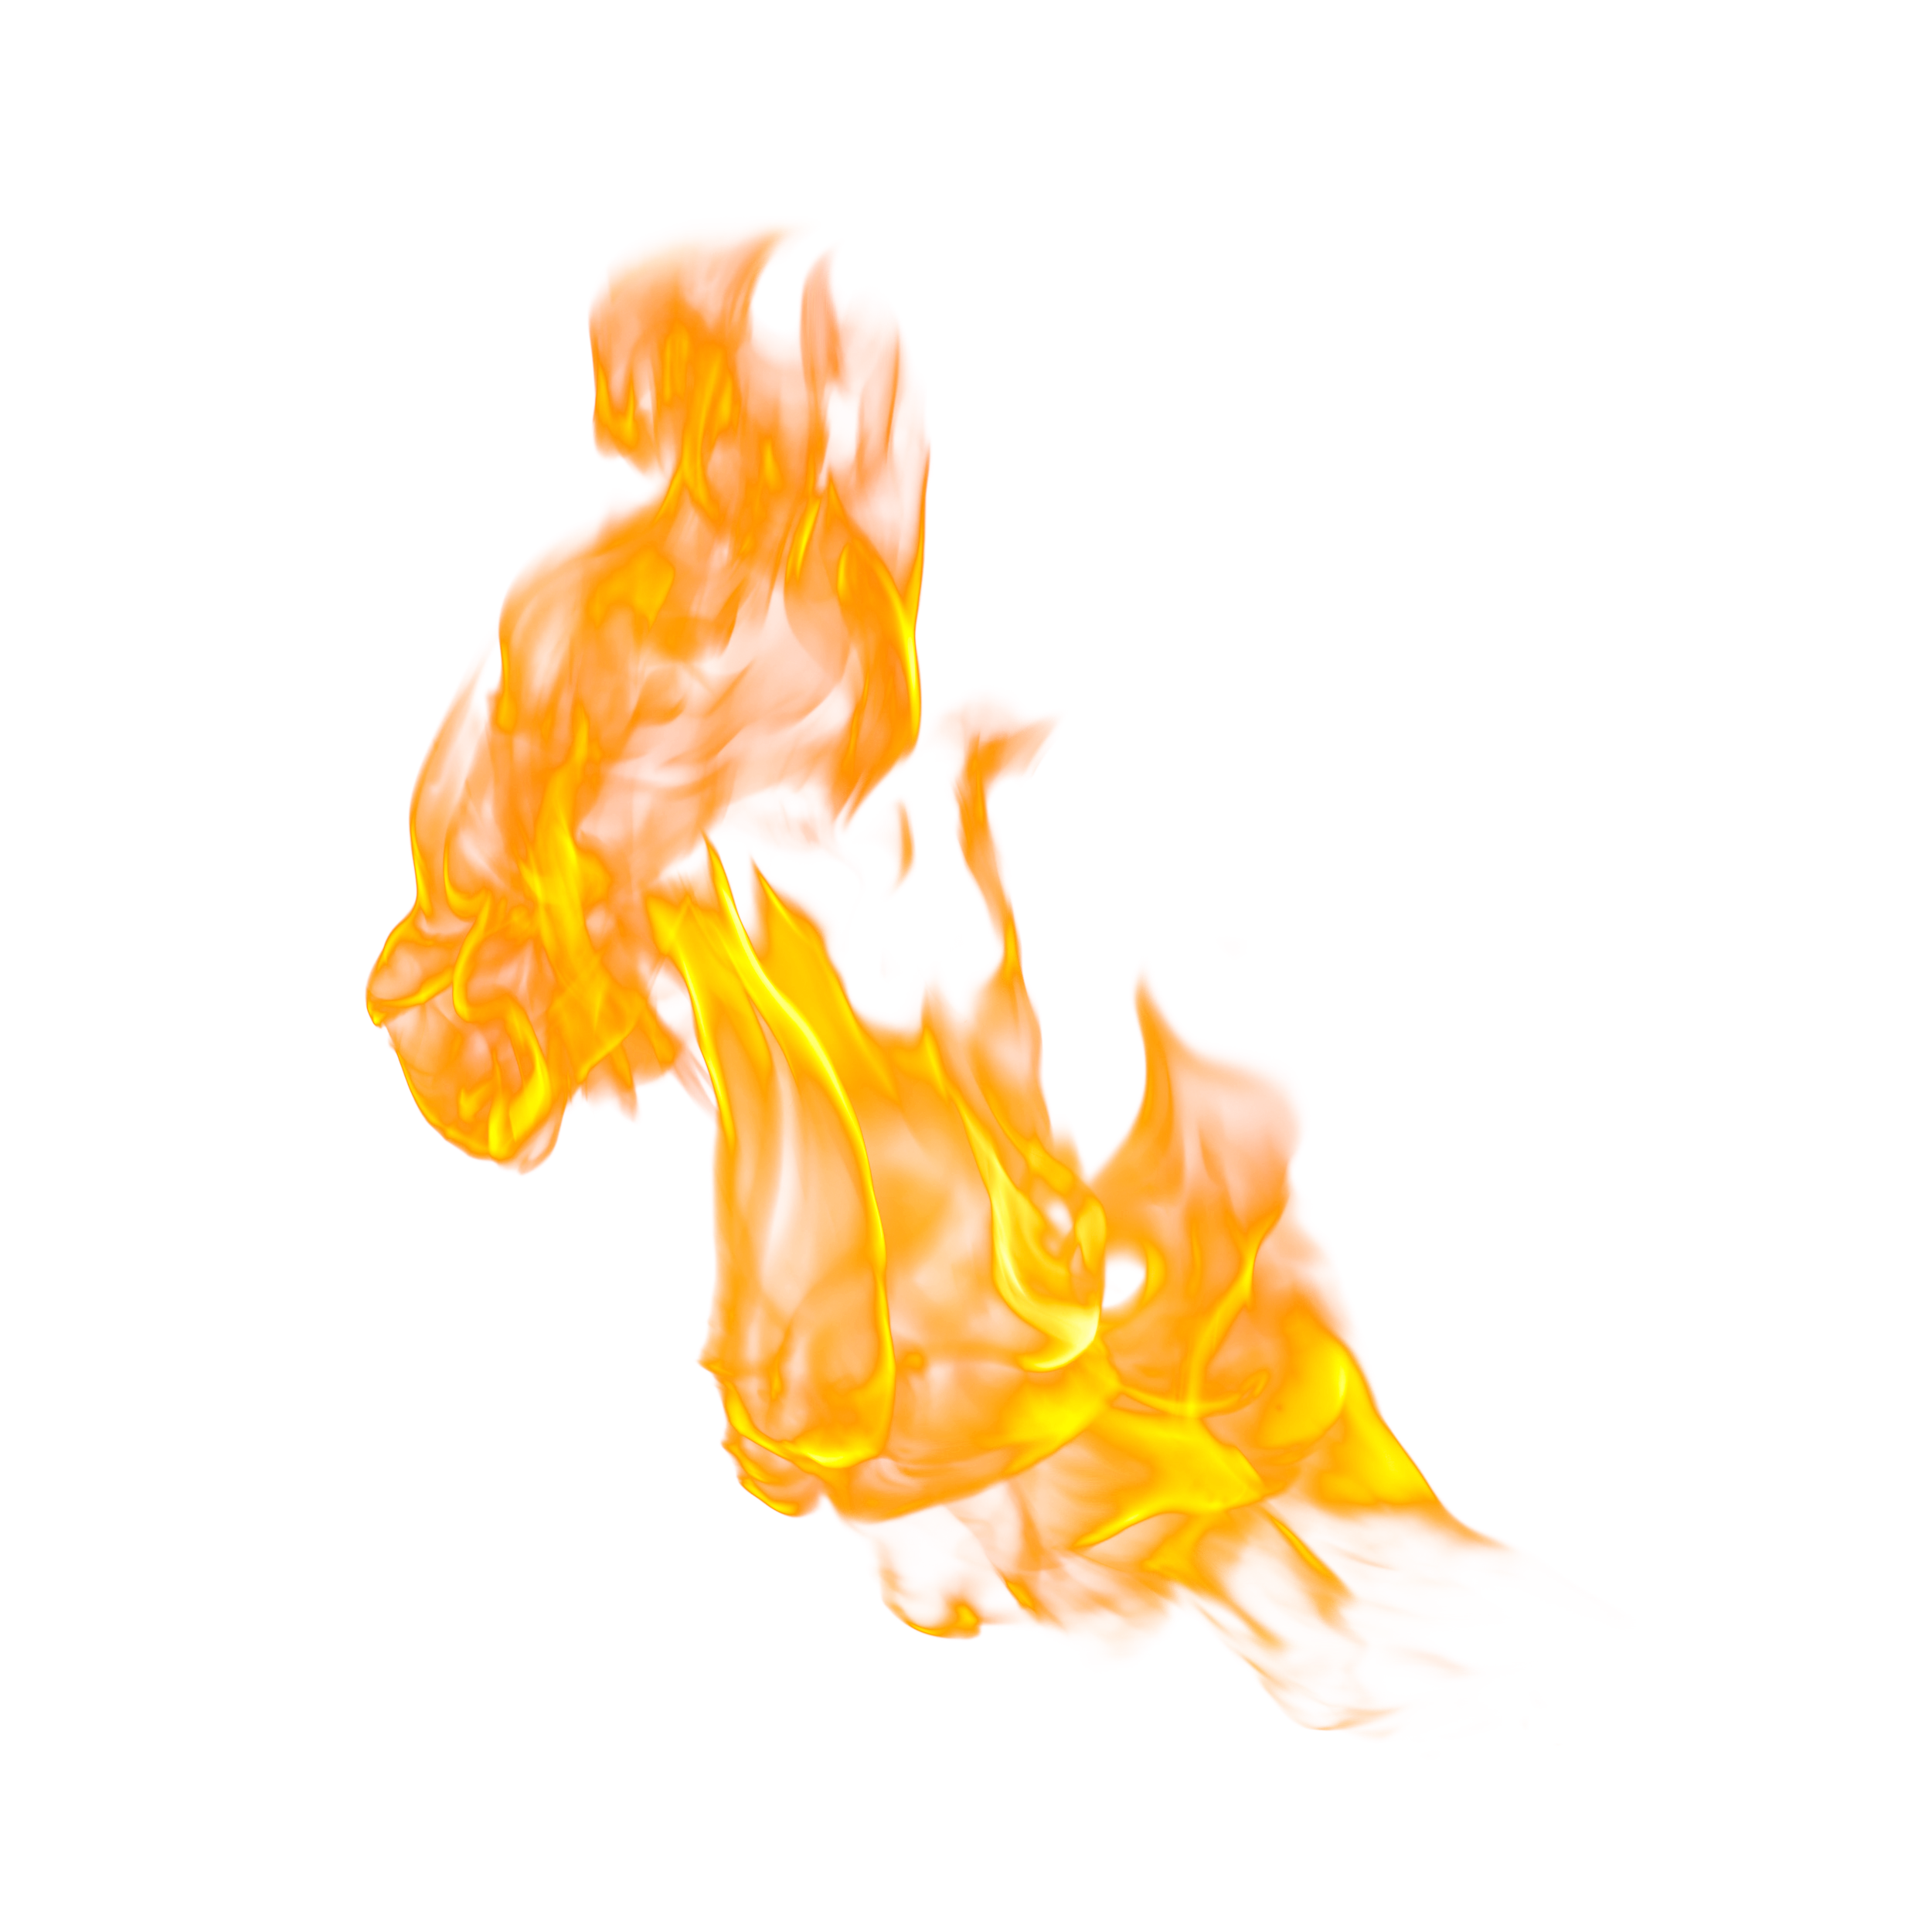 Flame Fire Combustion Yellow - Yellow background vibrant ...